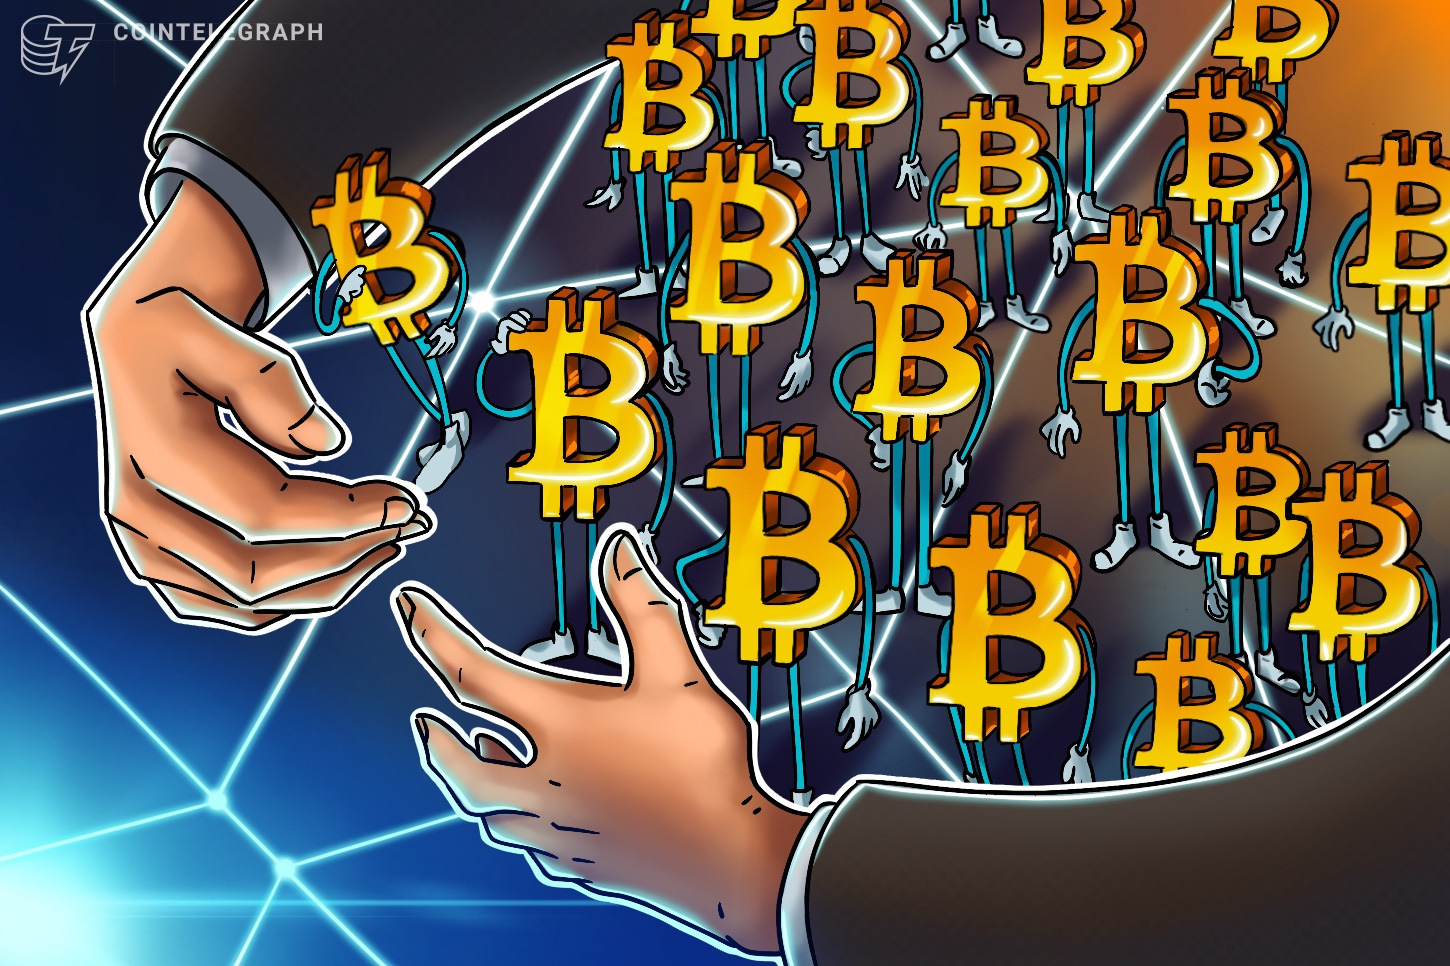 New institutional participant — MassMutual purchases $100M Bitcoin